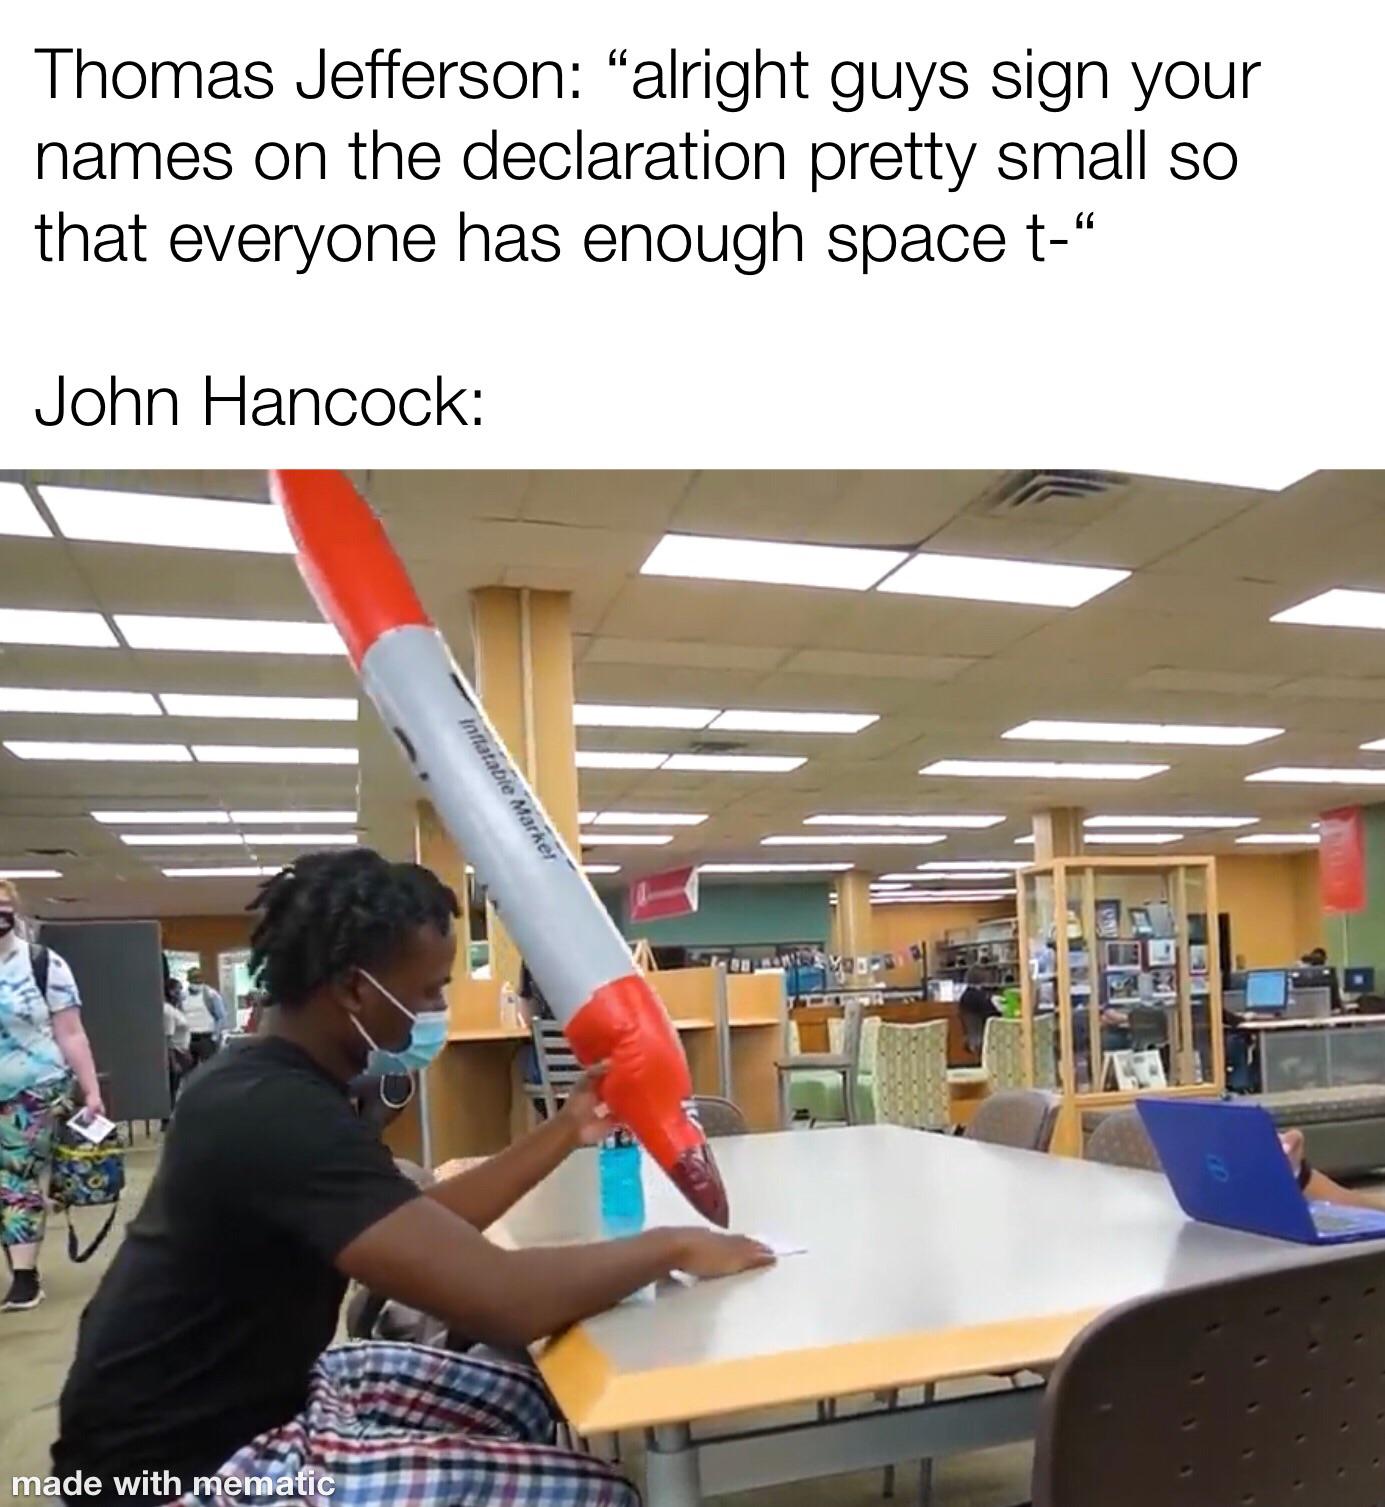 dank memes - learning - Thomas Jefferson "alright guys sign your names on the declaration pretty small so that everyone has enough space t" John Hancock made with mematic Inflatable Marker